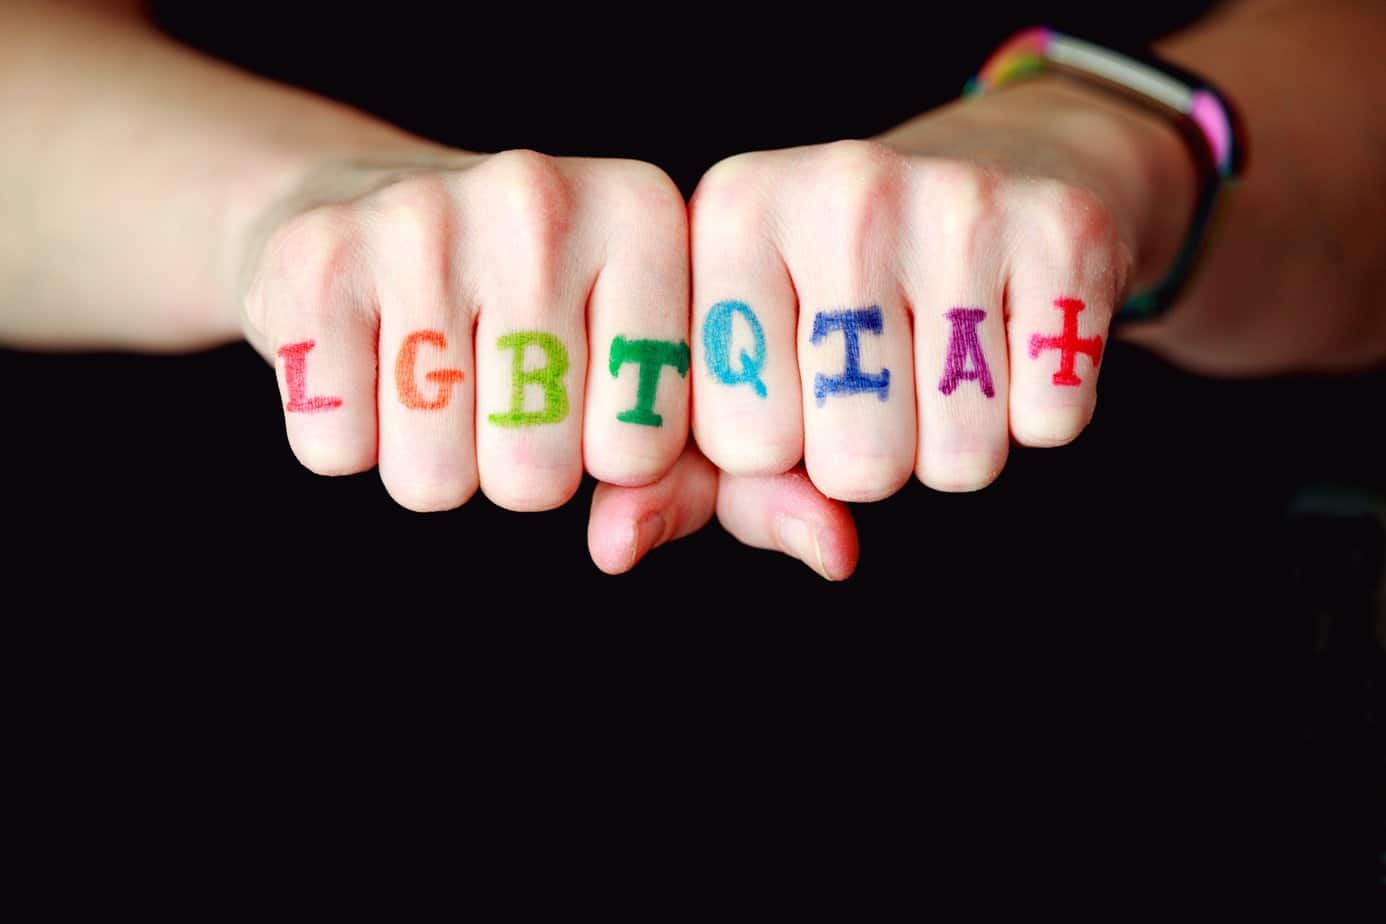 LGBTQIA+ handwriting on knuckles to represent the queer community